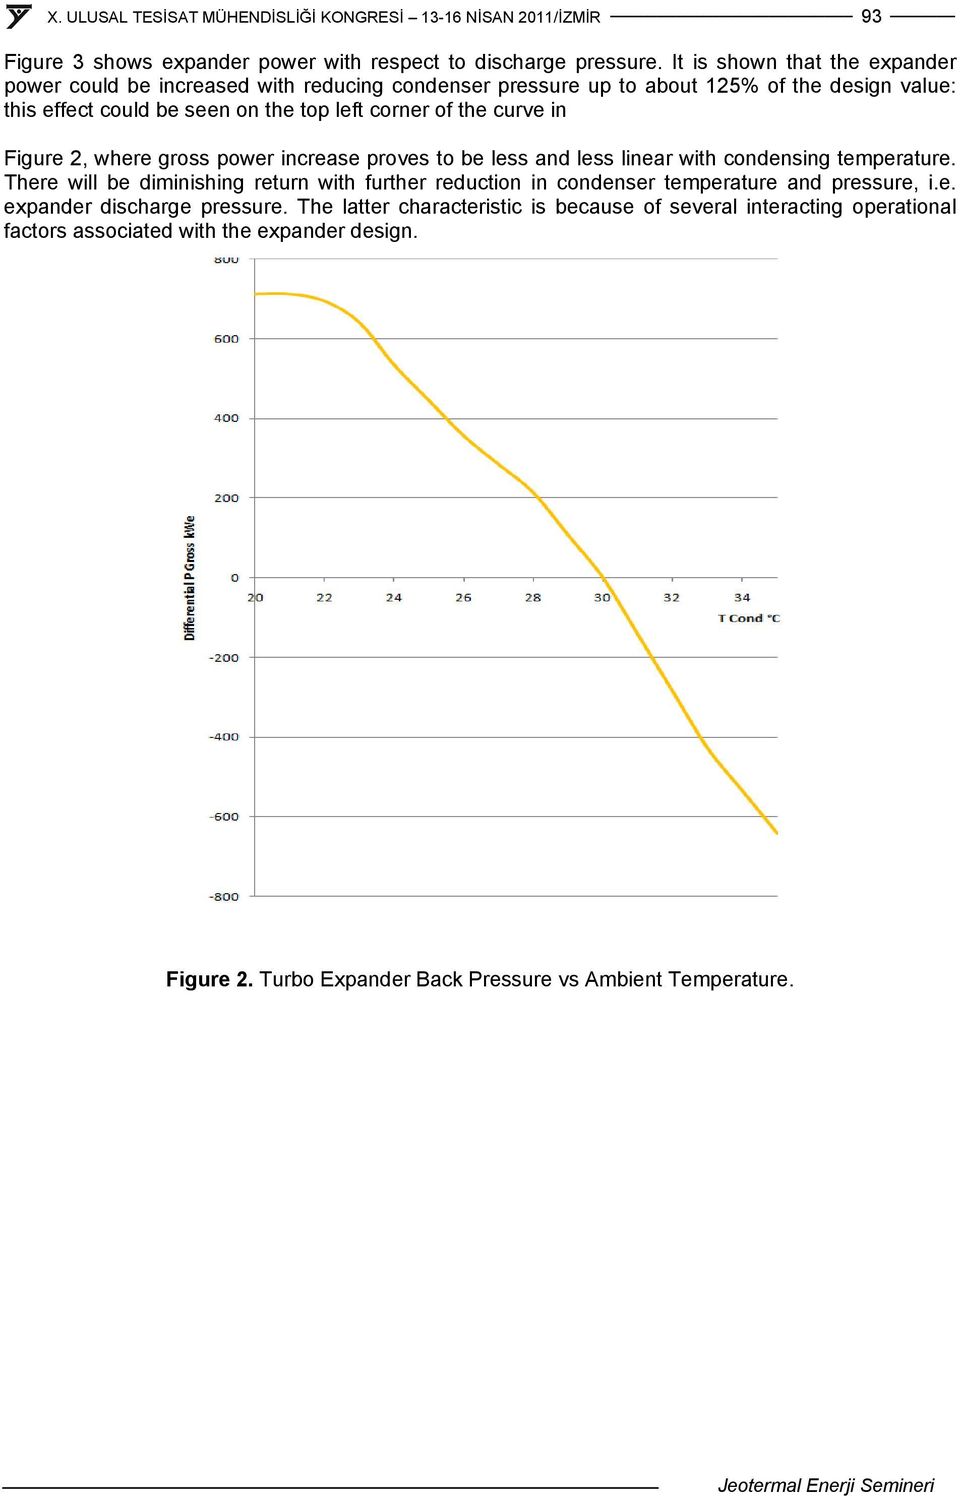 curve in Figure 2, where gross power increase proves to be less and less linear with condensing temperature.